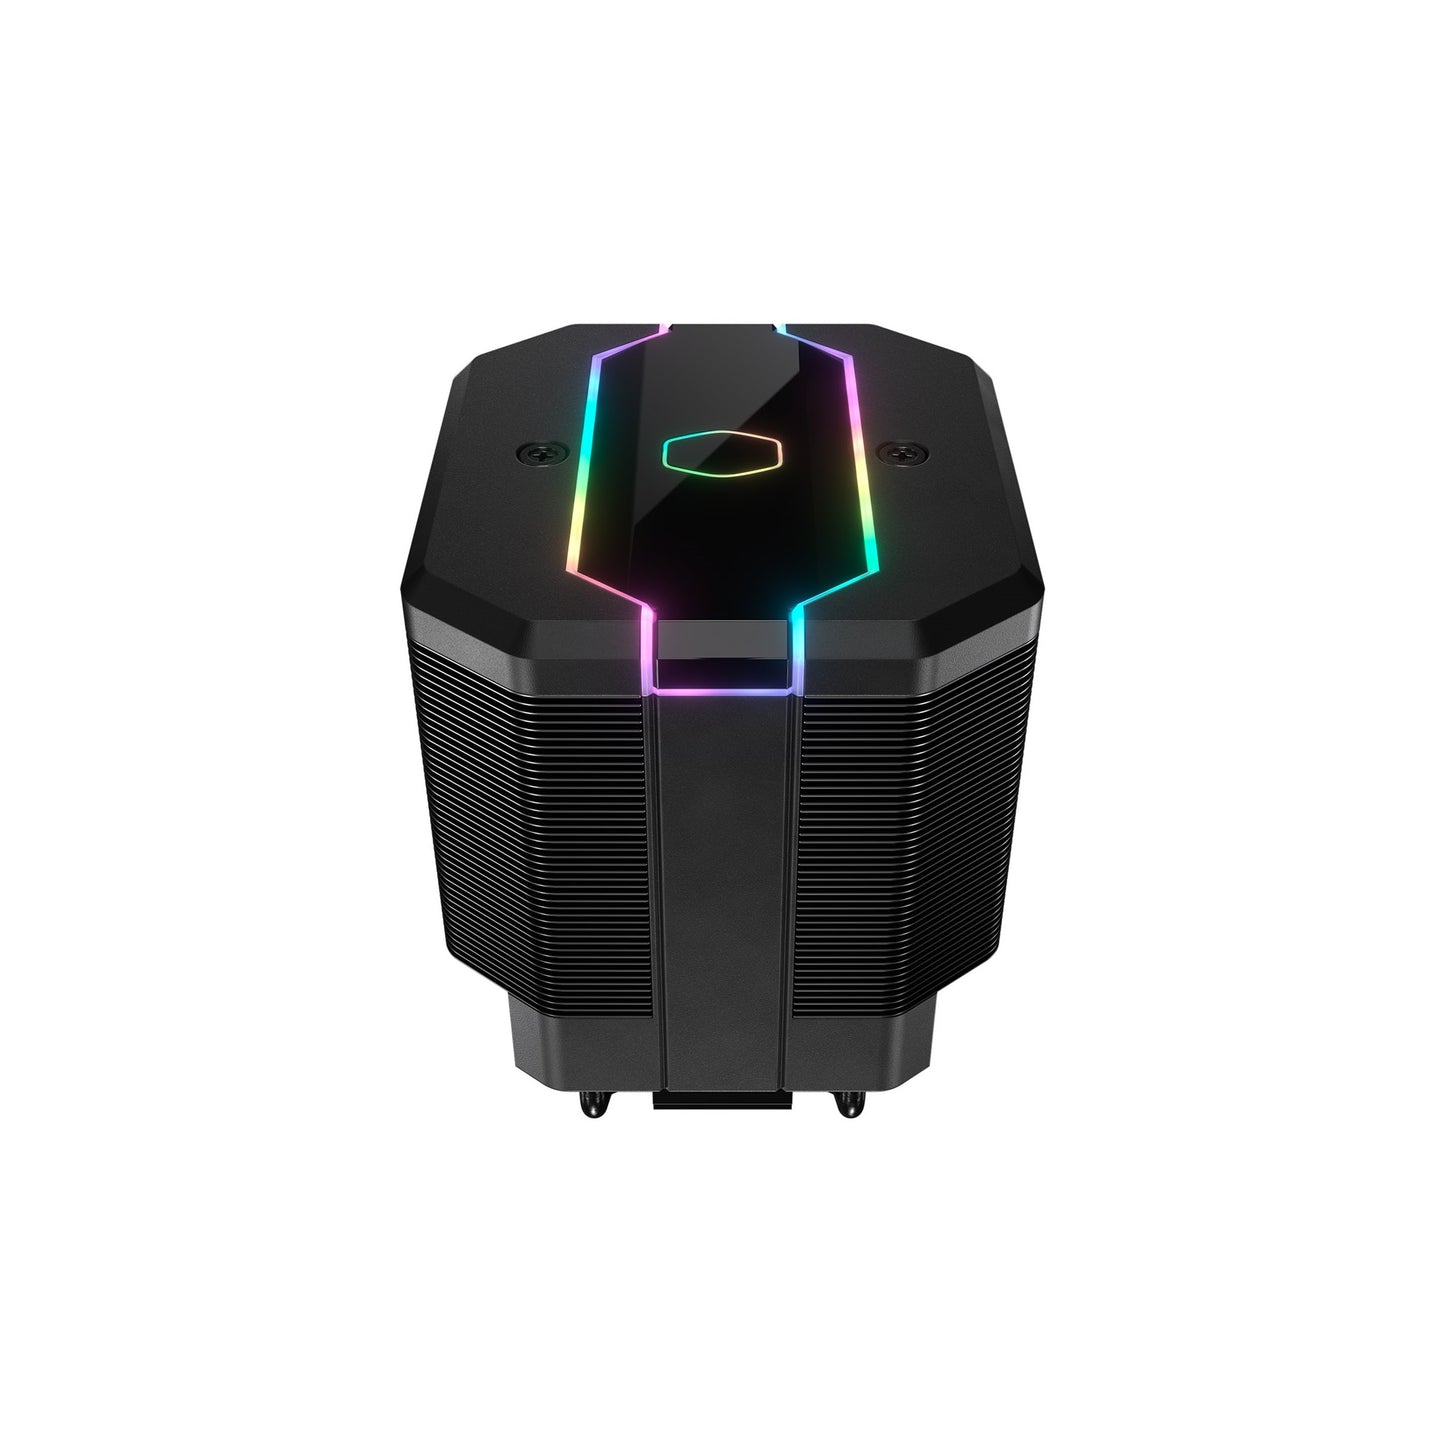 Cooler Master Masterair MA620M Dust Tower with Addressable RGB Lighting / Processor Cooler